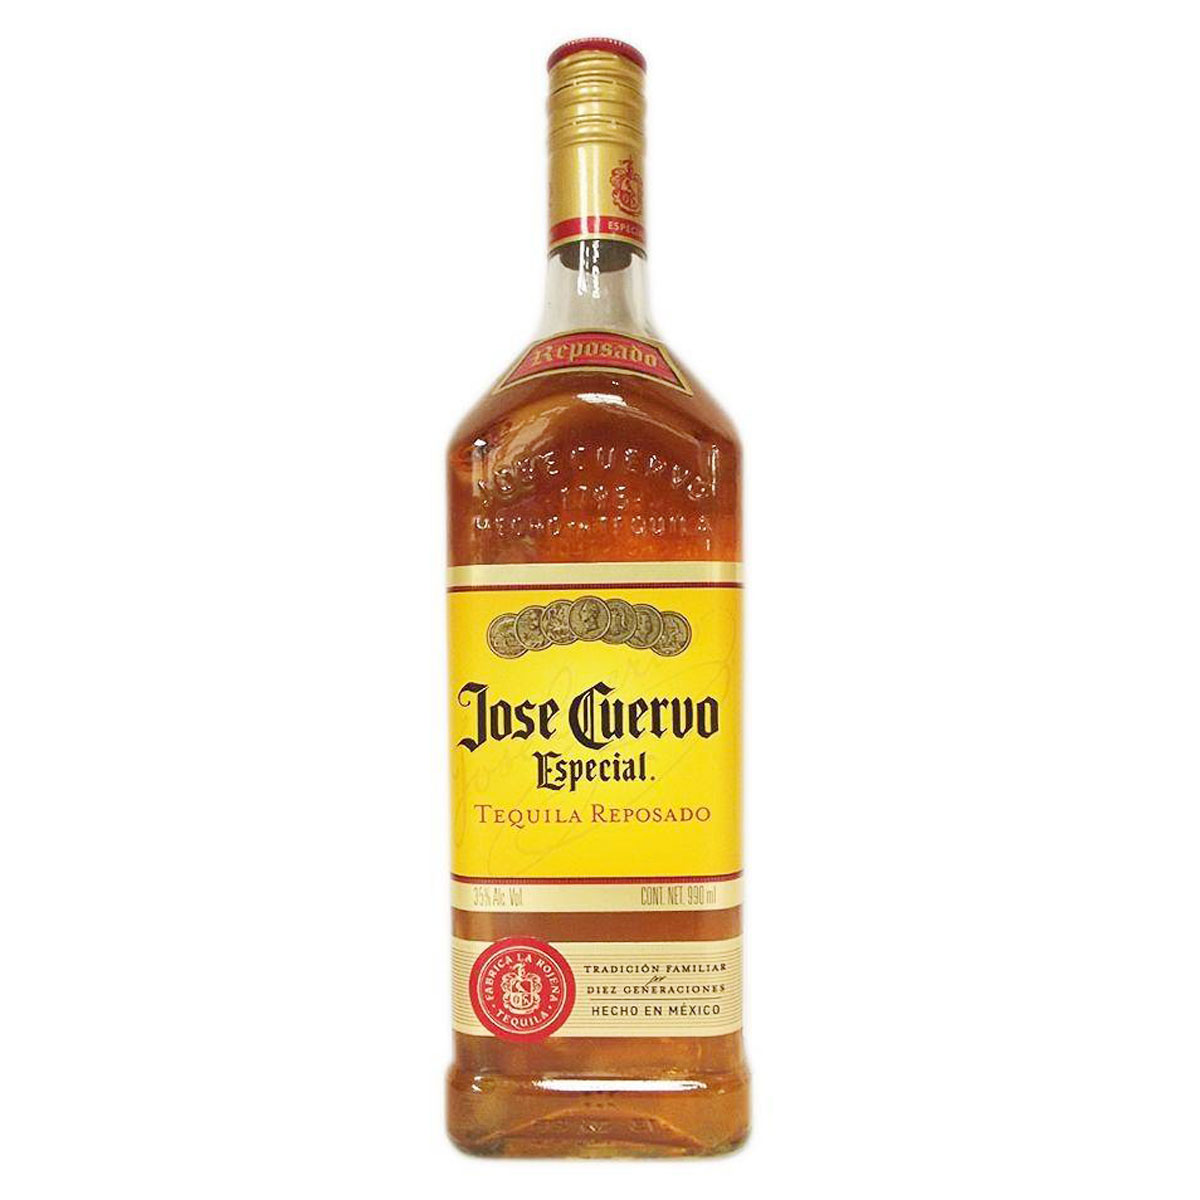 a bottle of jose cuervo especial tequila